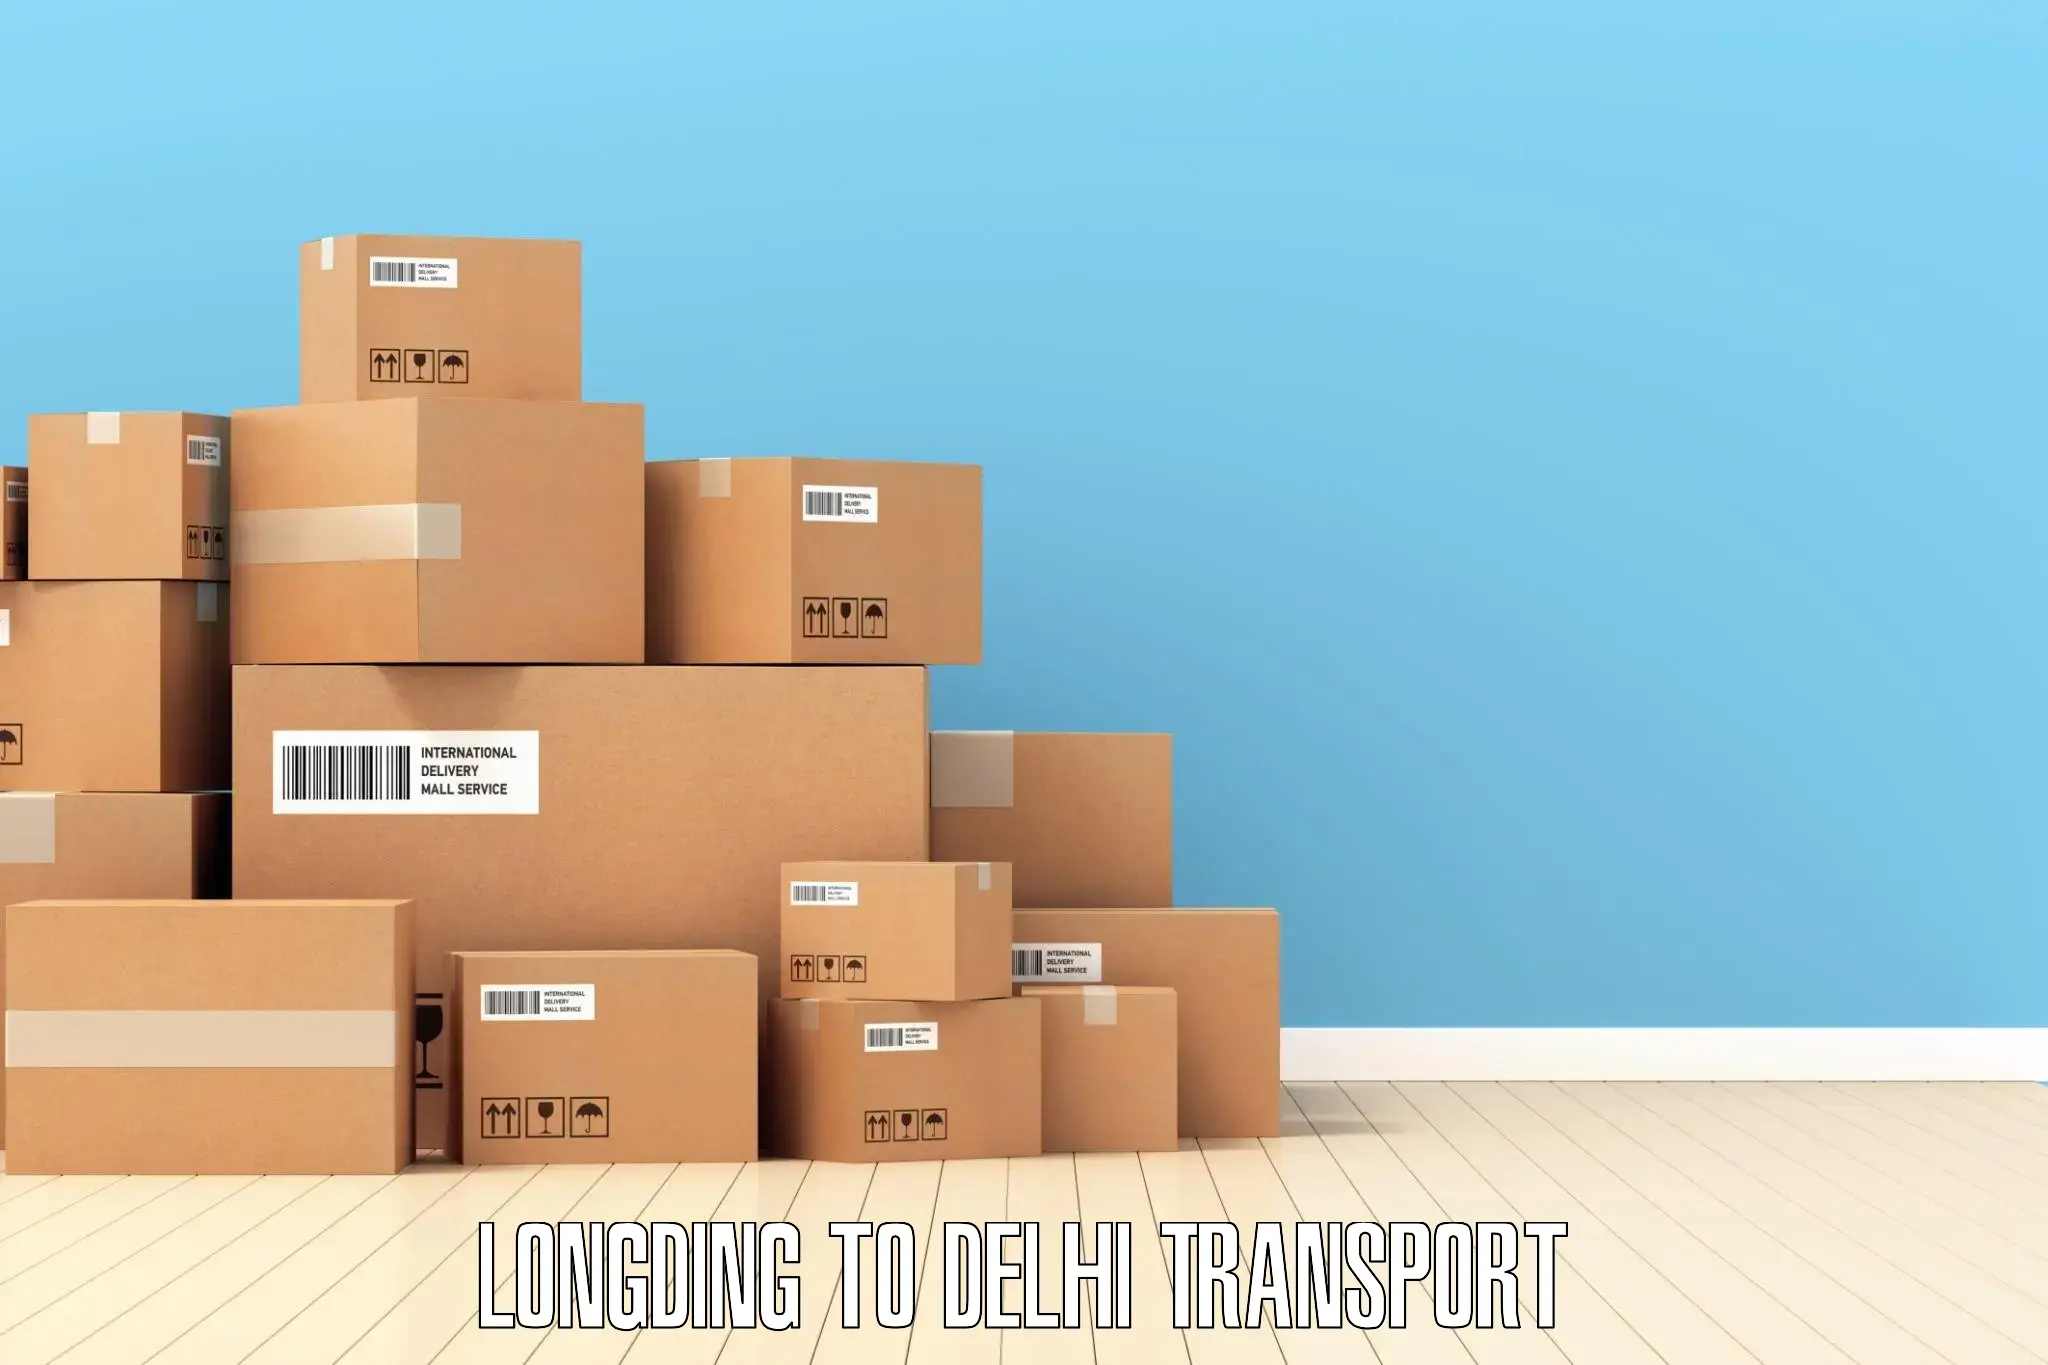 Transport bike from one state to another Longding to IIT Delhi